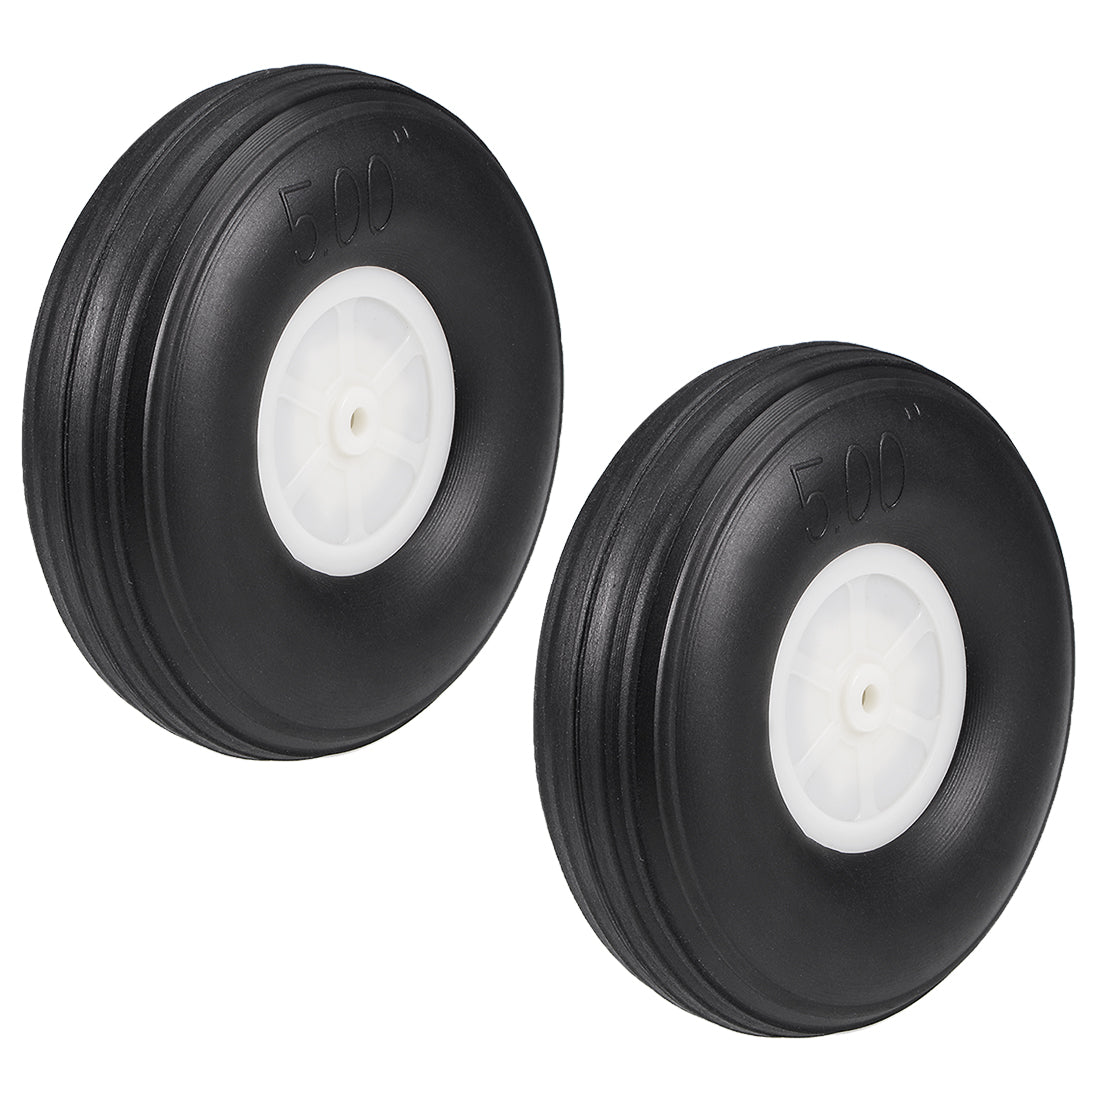 uxcell Uxcell Tire and Wheel Sets for RC Car Airplane,PU Sponge Tire with Plastic Hub,5" 2pcs